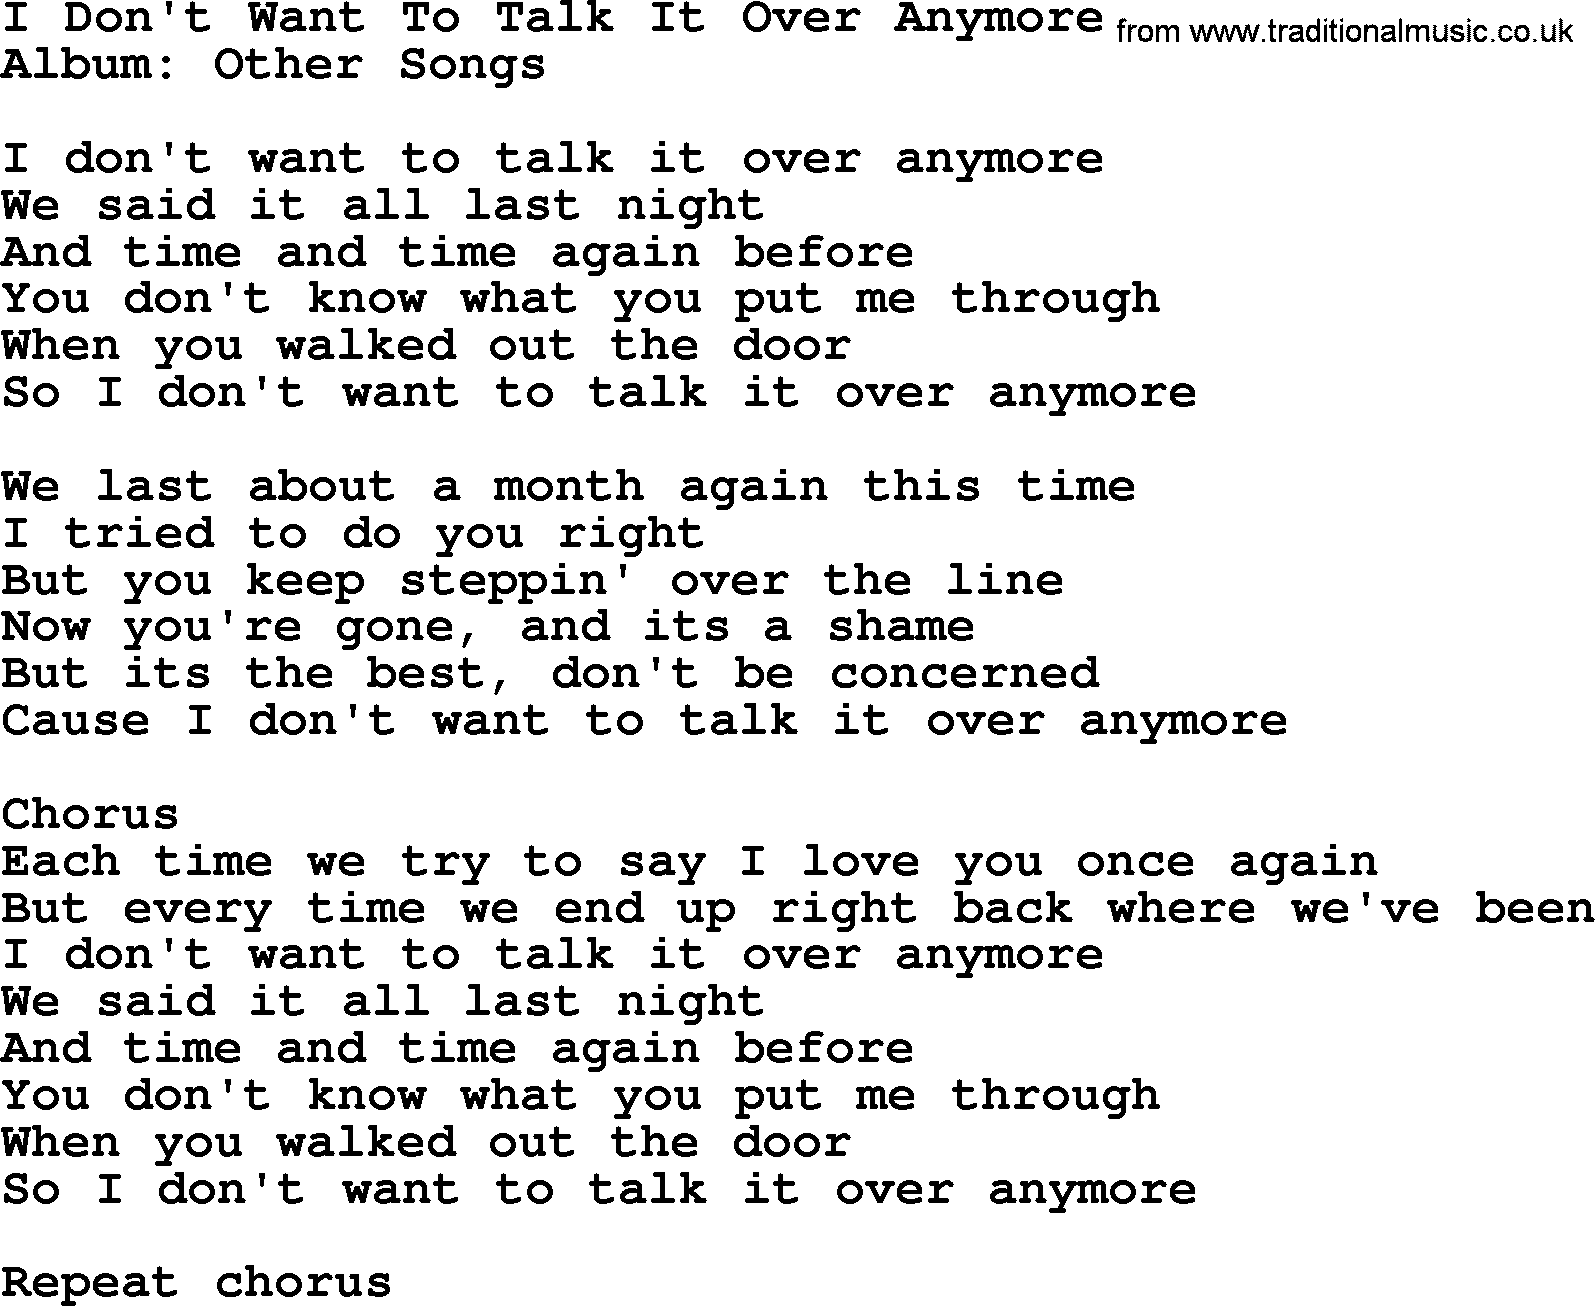 George Strait song: I Don't Want To Talk It Over Anymore, lyrics